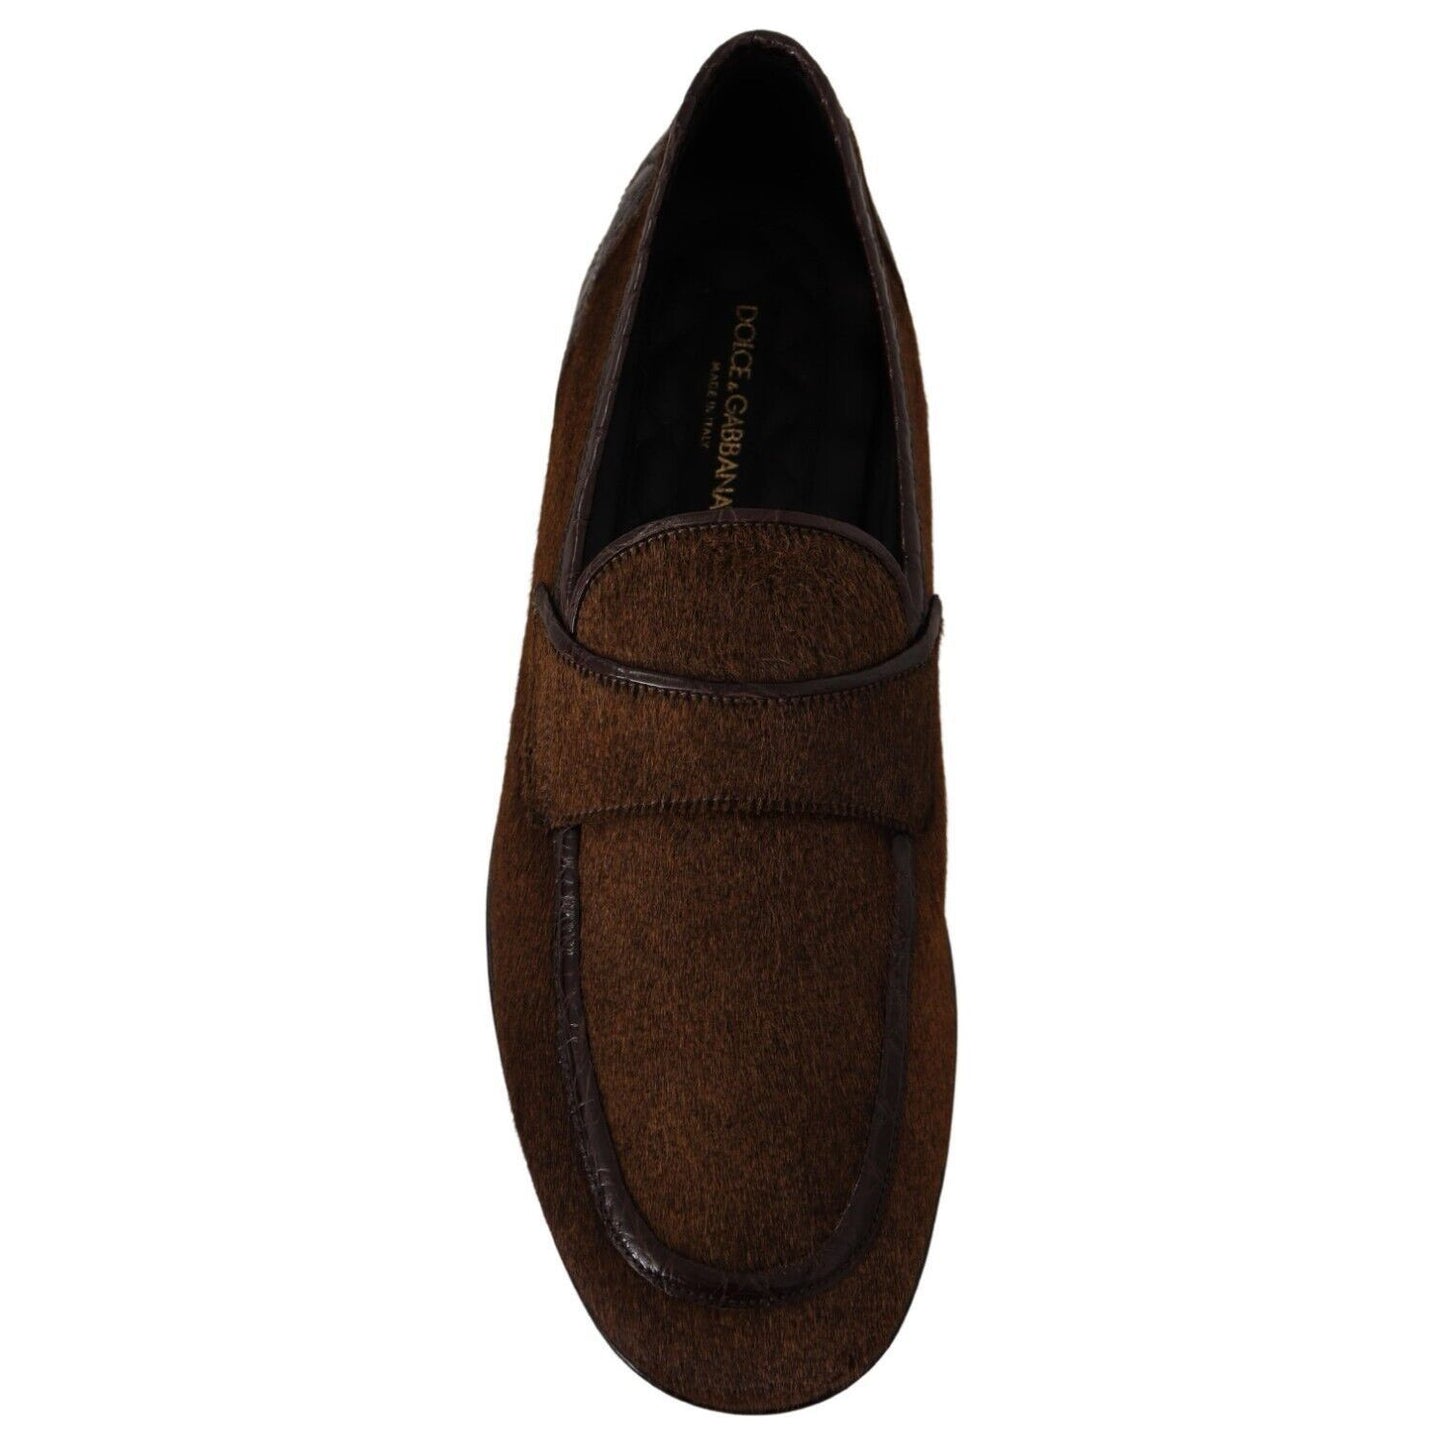 Dolce & Gabbana Exquisite Exotic Leather Loafers brown-exotic-leather-mens-slip-on-loafers-shoes s-l1600-21-6-b0f318d7-3e1.jpg